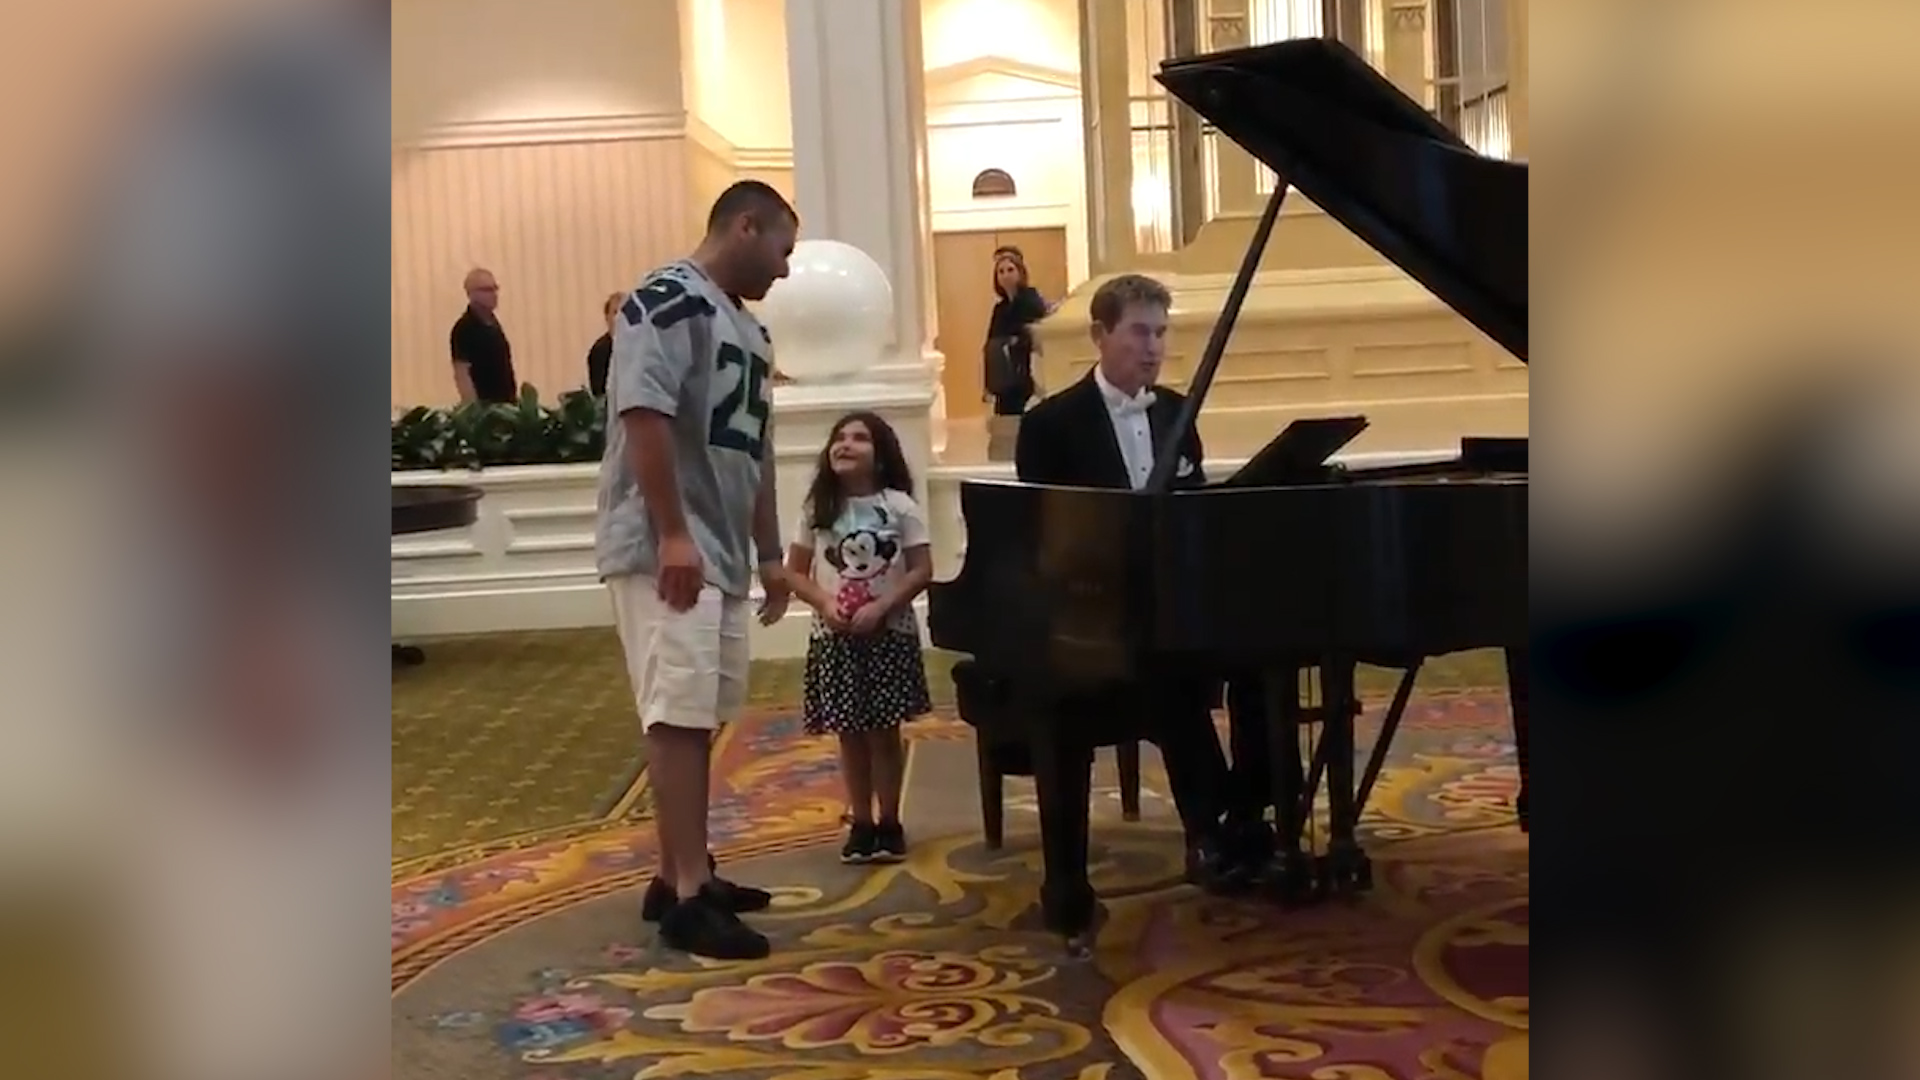 The daughter asked the pianist to play, and the father started to sing.